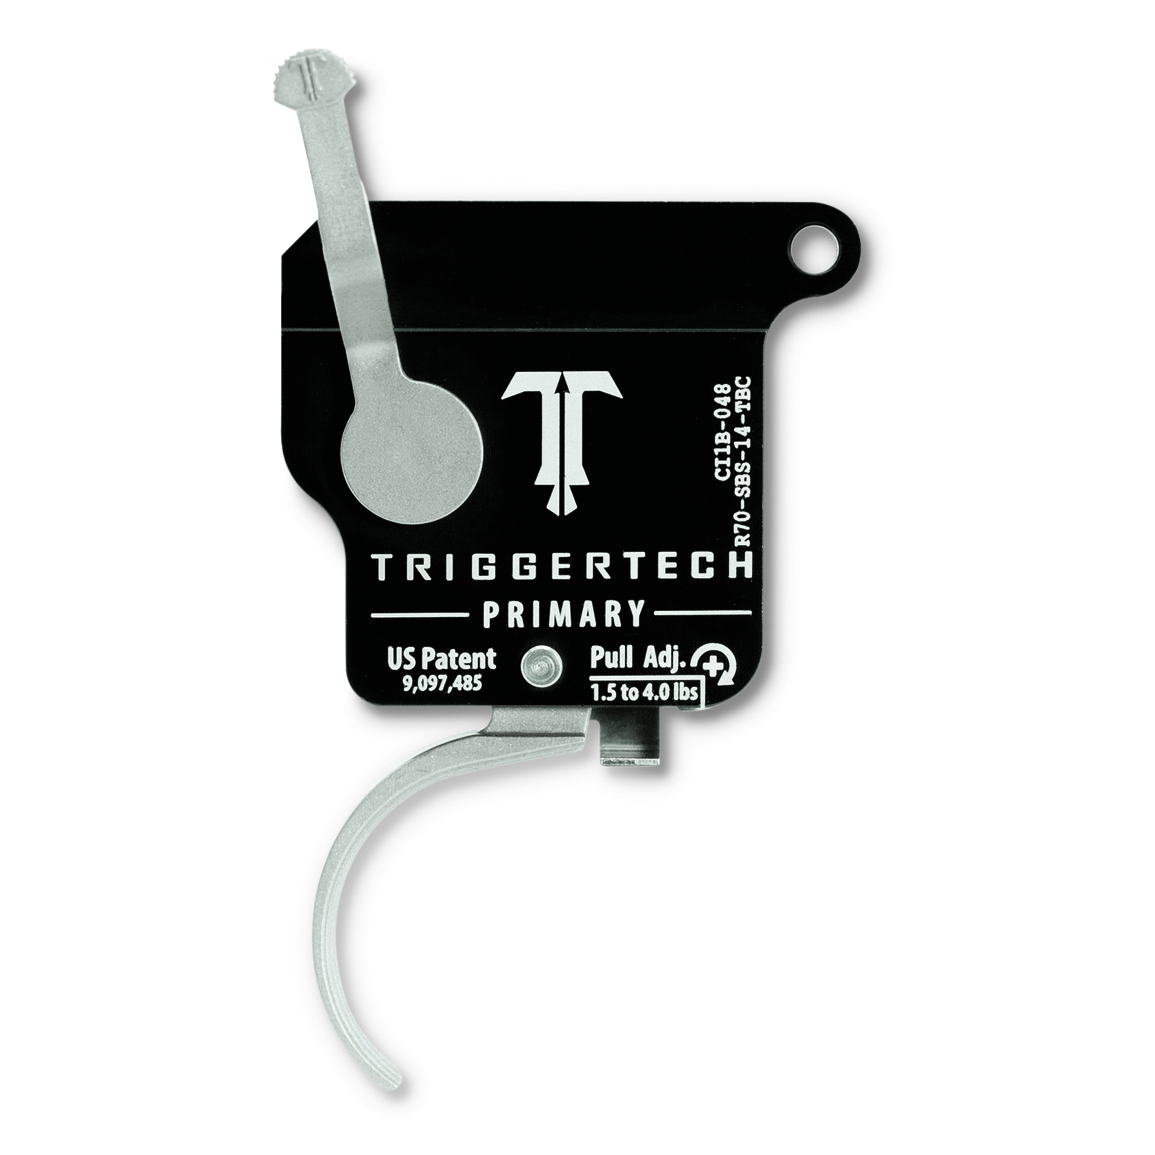 TriggerTech Remington 700 Primary Single-Stage Curved Trigger, Right Hand, with Bolt Release